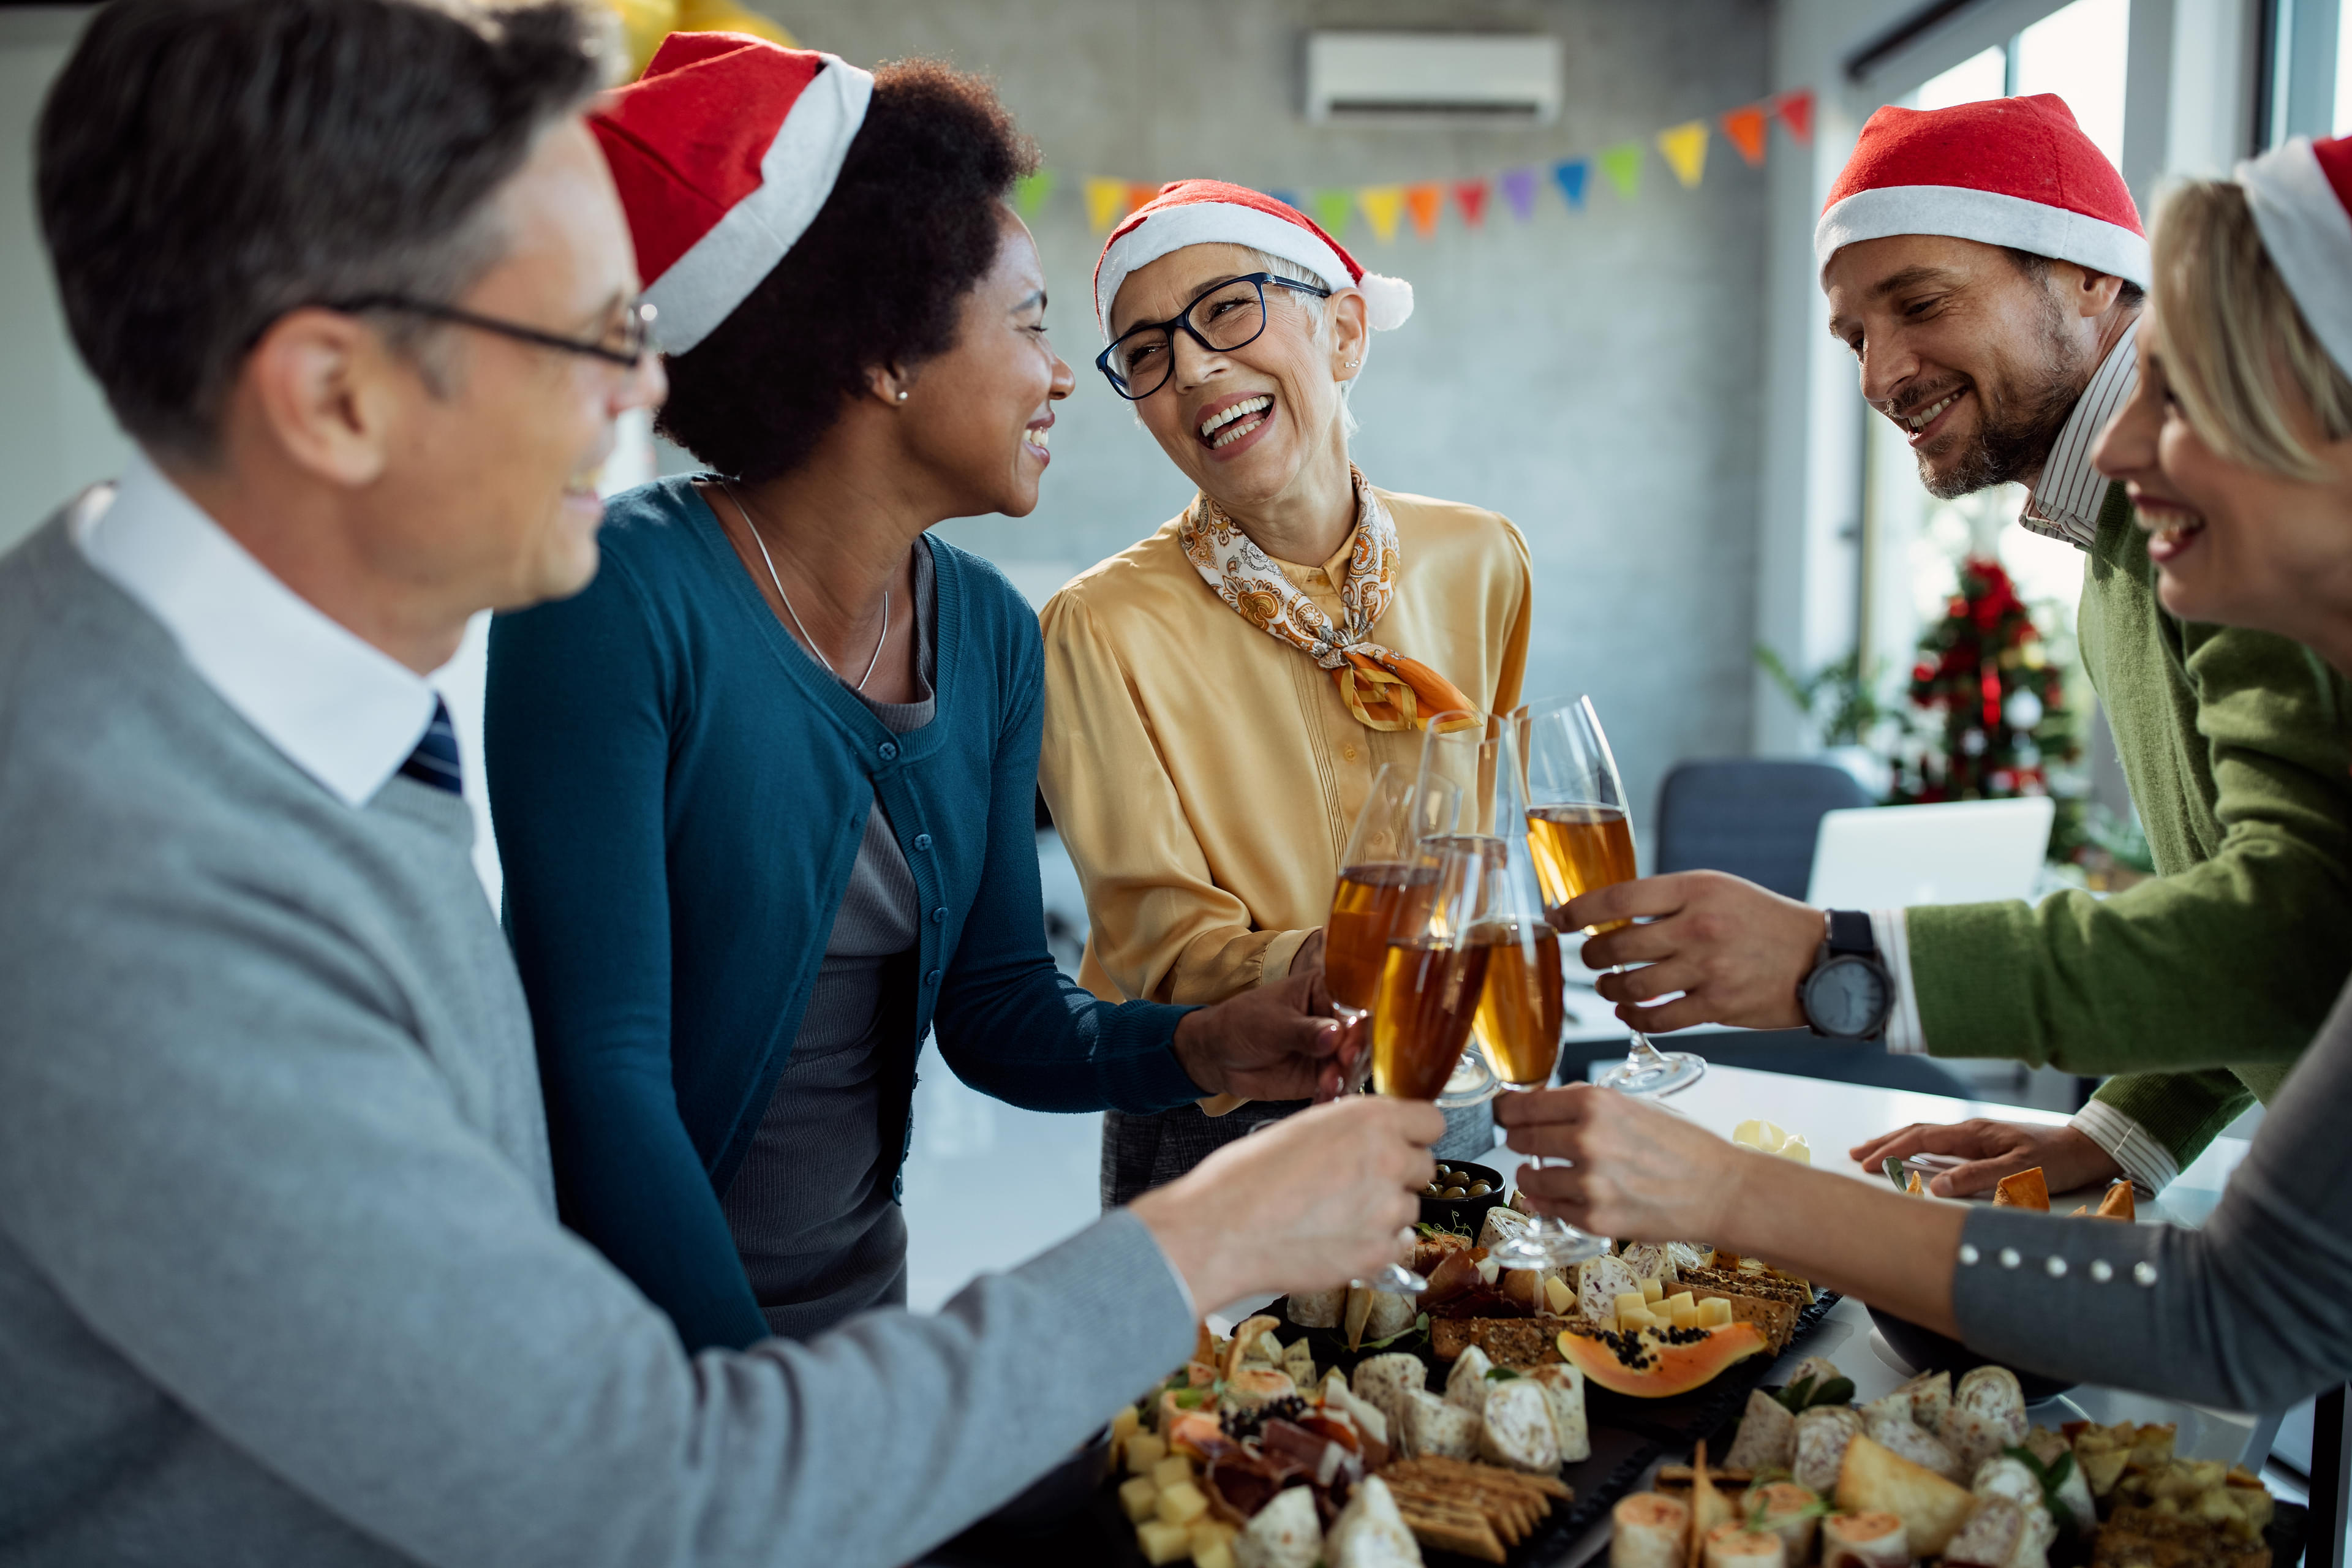 Creating a Festive Atmosphere in Your Staff Pantry - Hampr Tips for a Merry Workplace